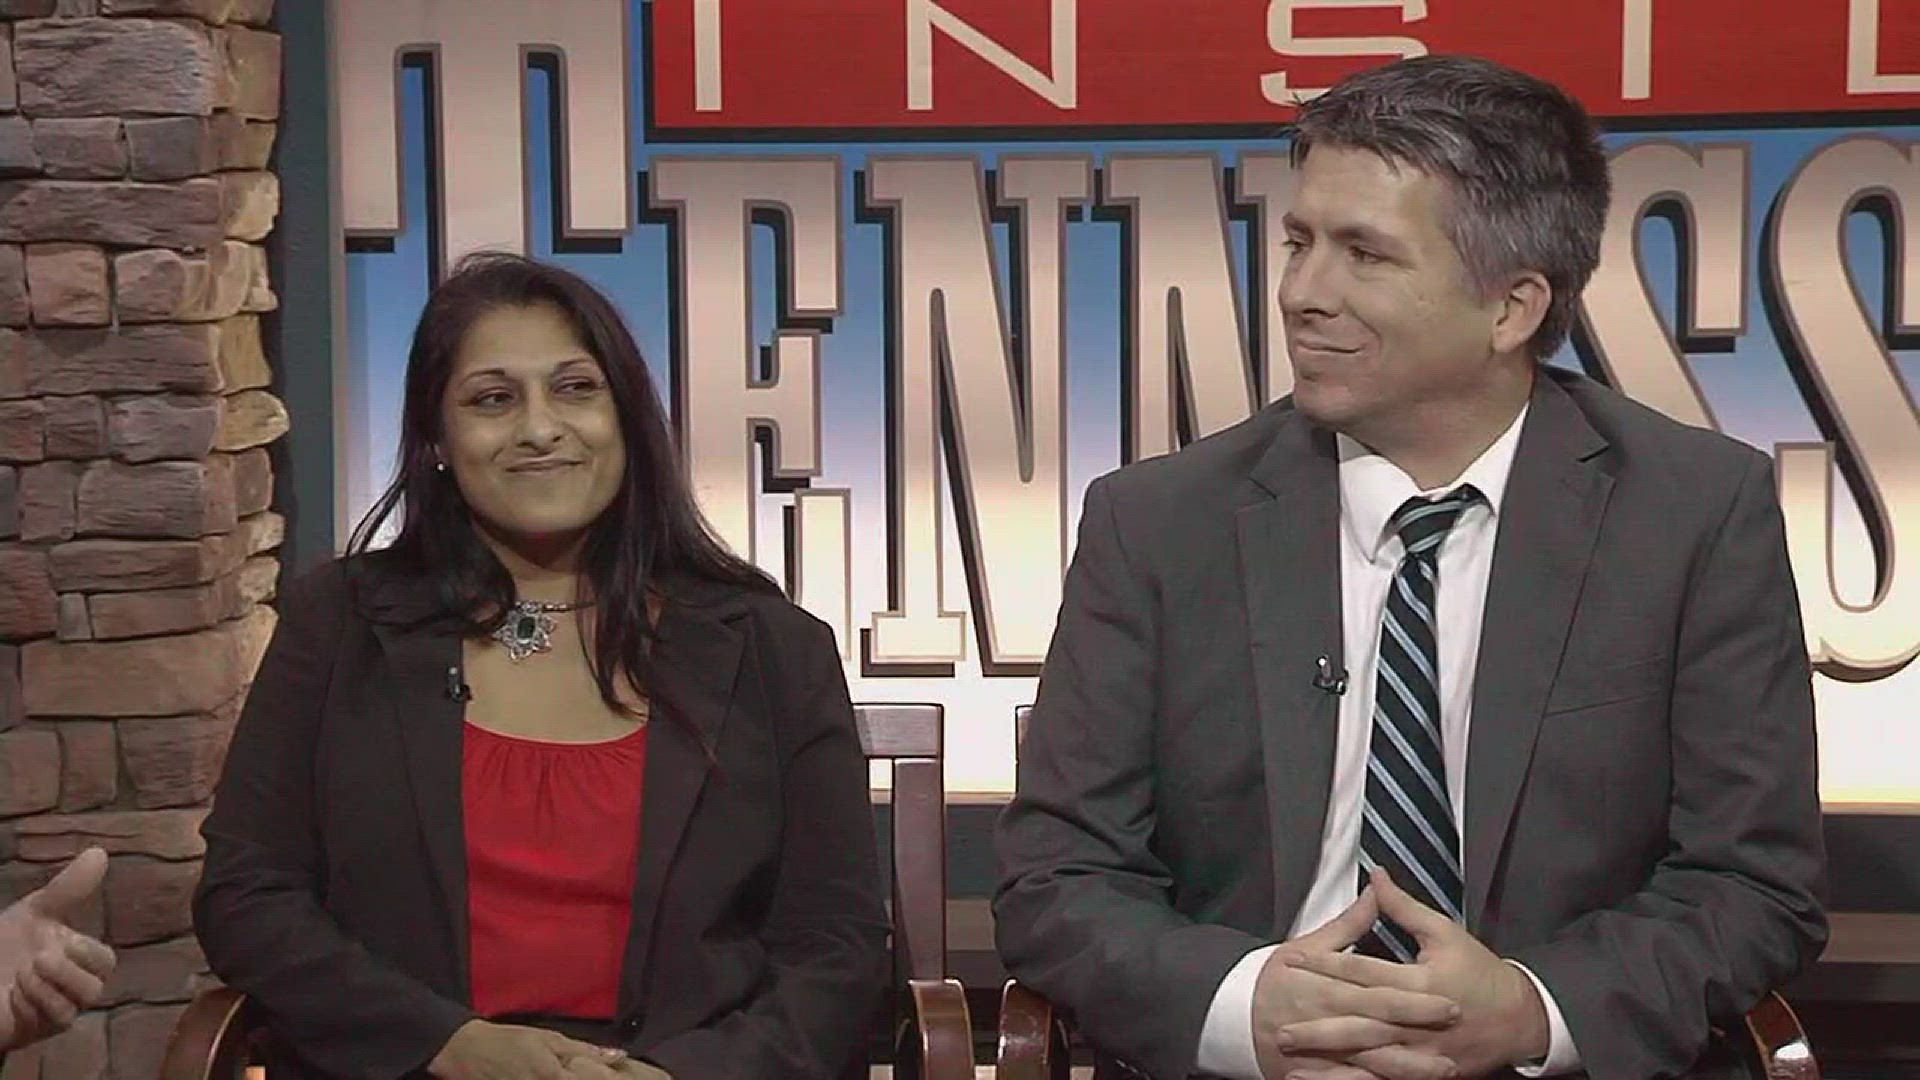 Knoxville City Council candidates Seema Perez and James Corcoran talk about the race for District 3.